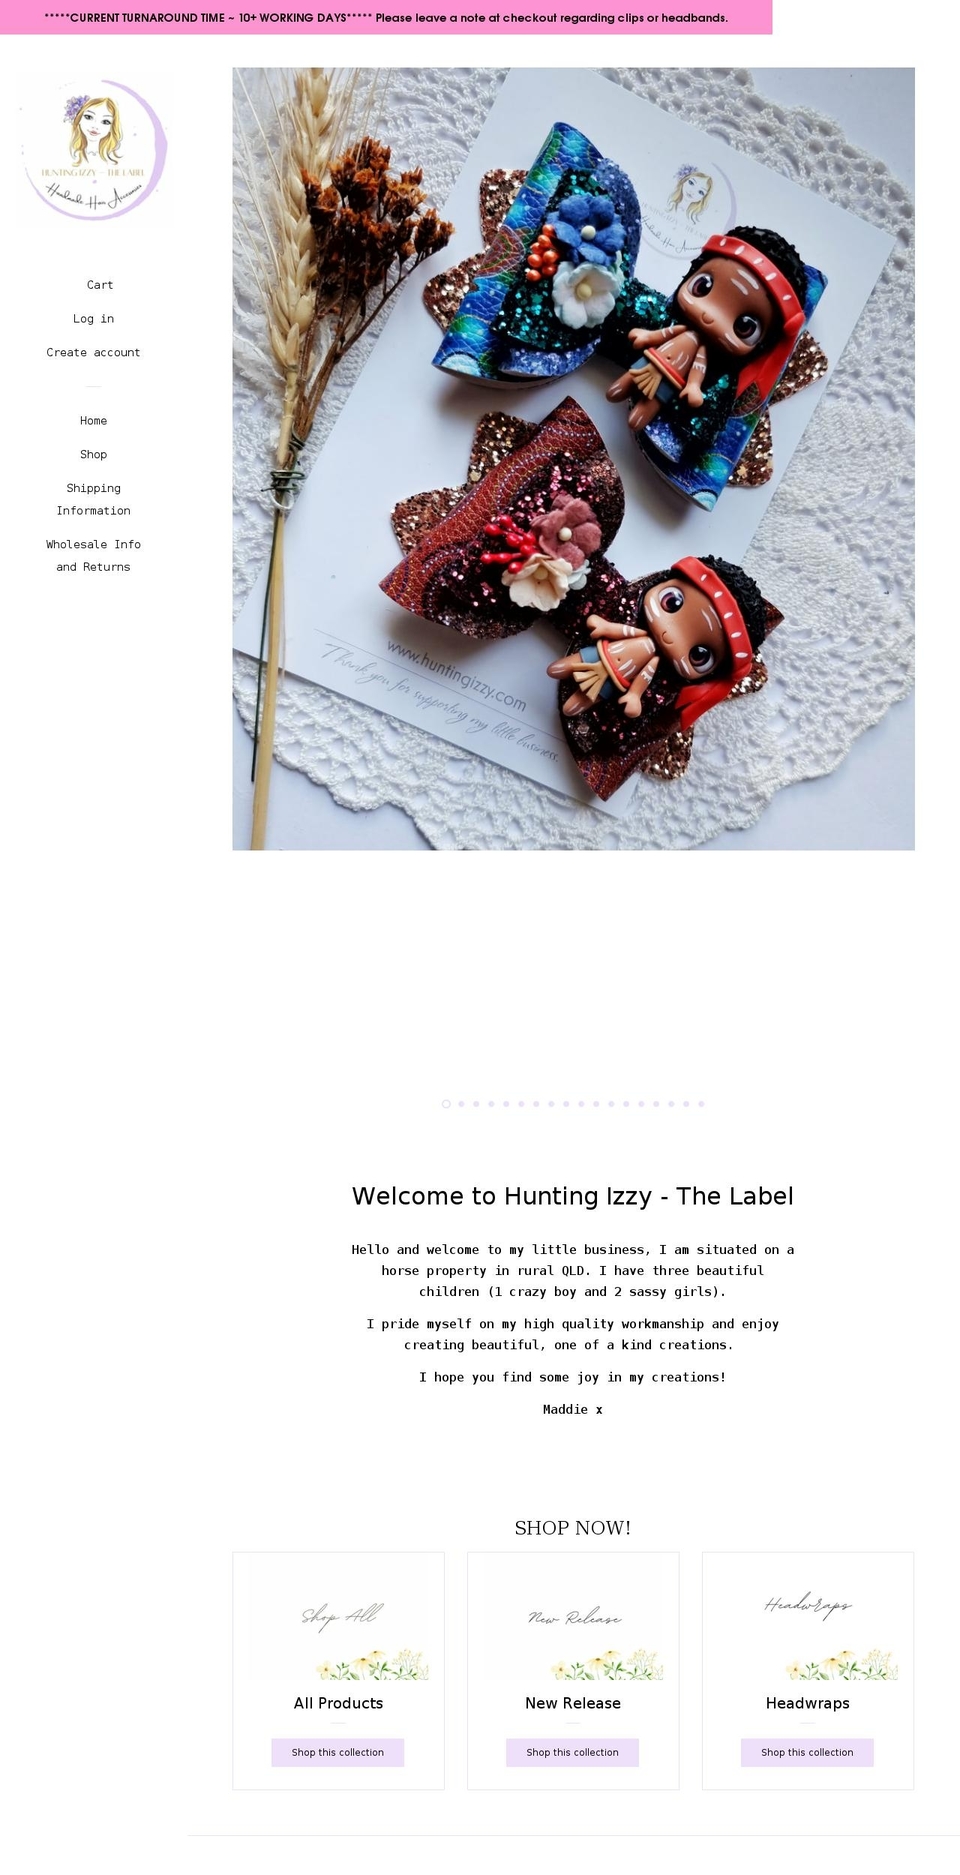 Copy of Pop Shopify theme site example huntingizzy.com